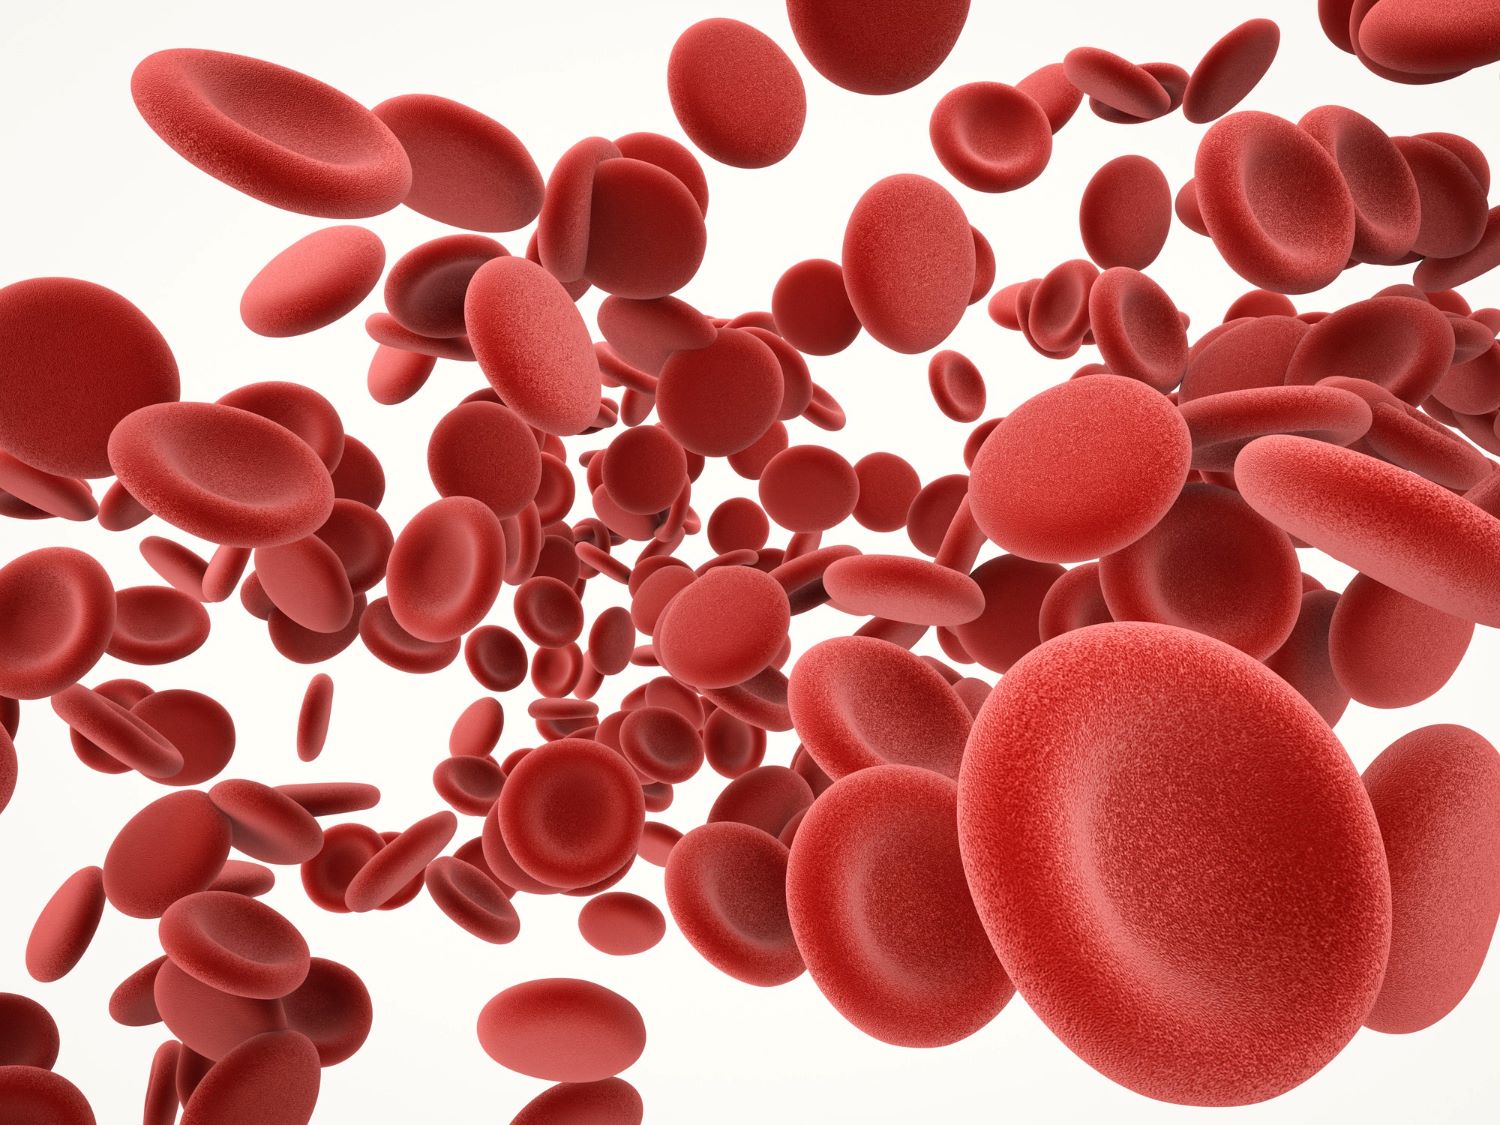 3d rendering red blood cells